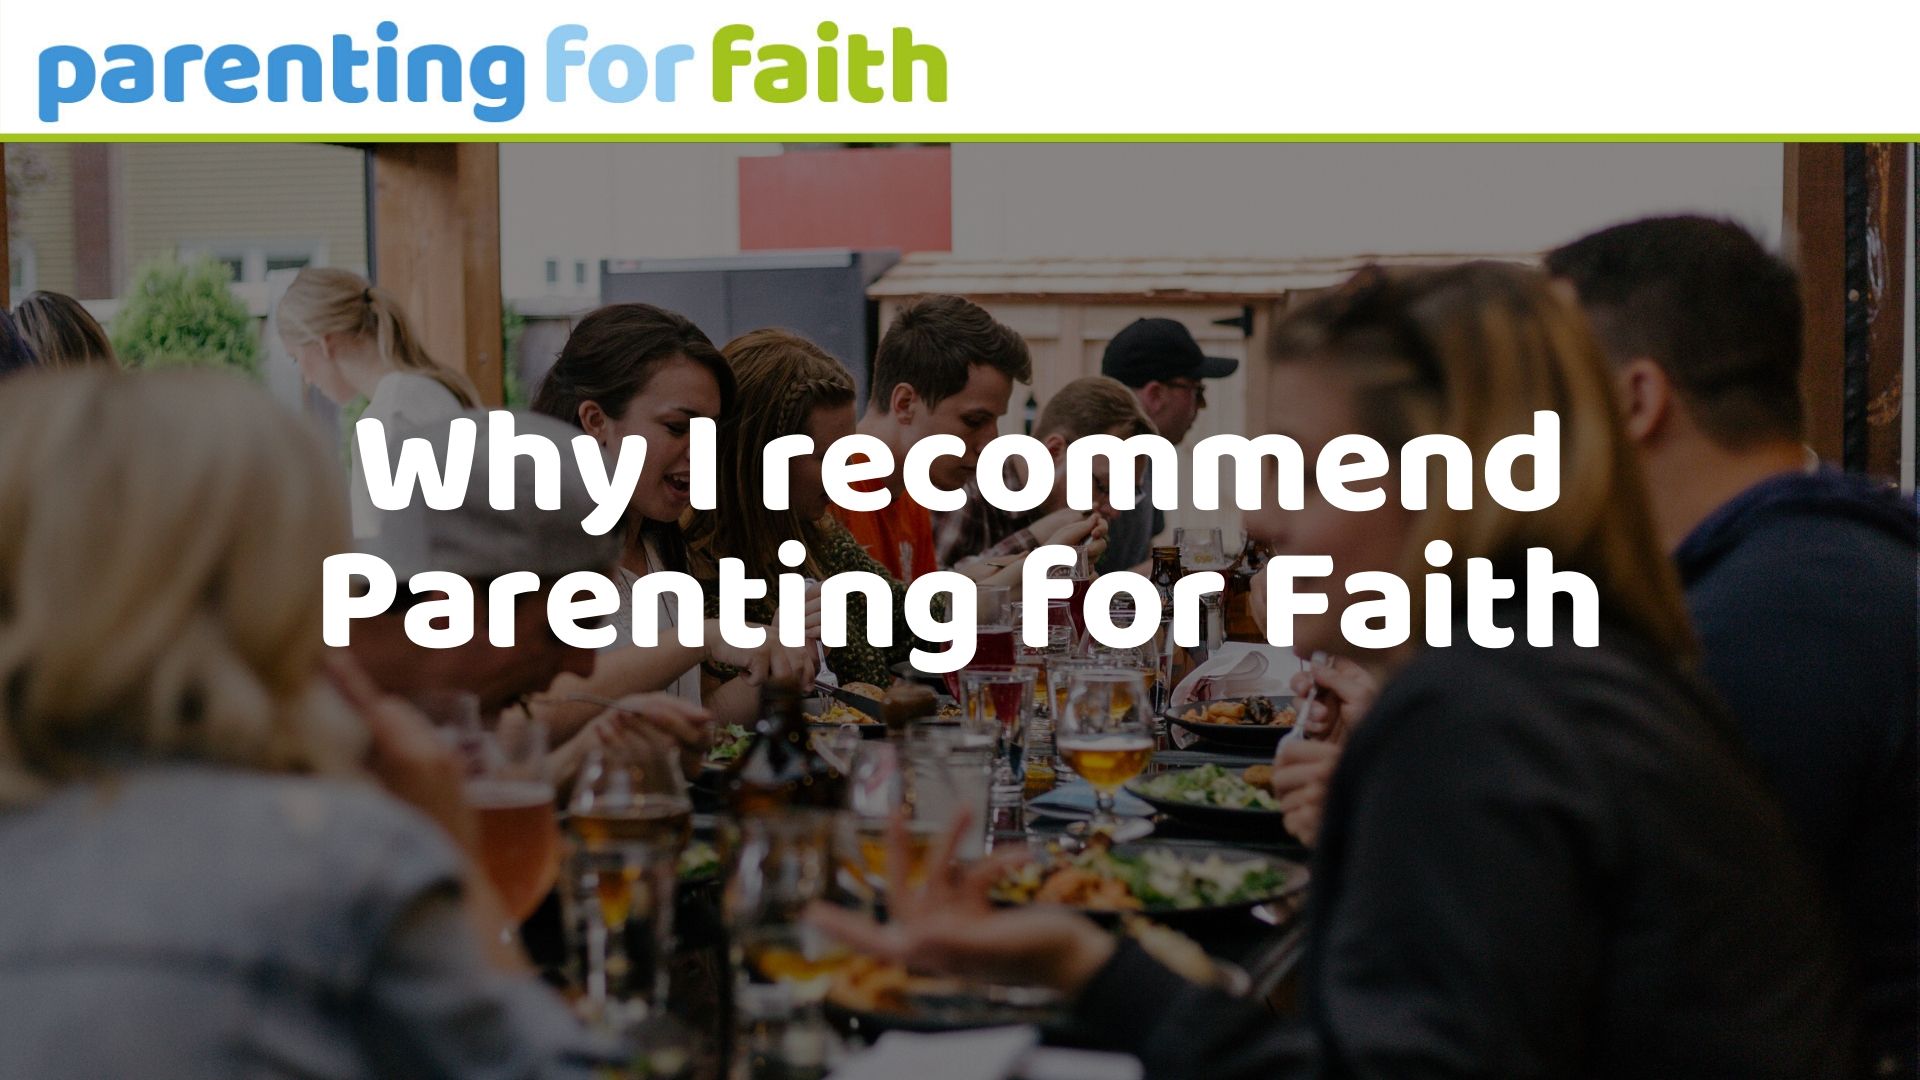 why I recommend parenting for faith OG image for PFF website 1920 x 1080px